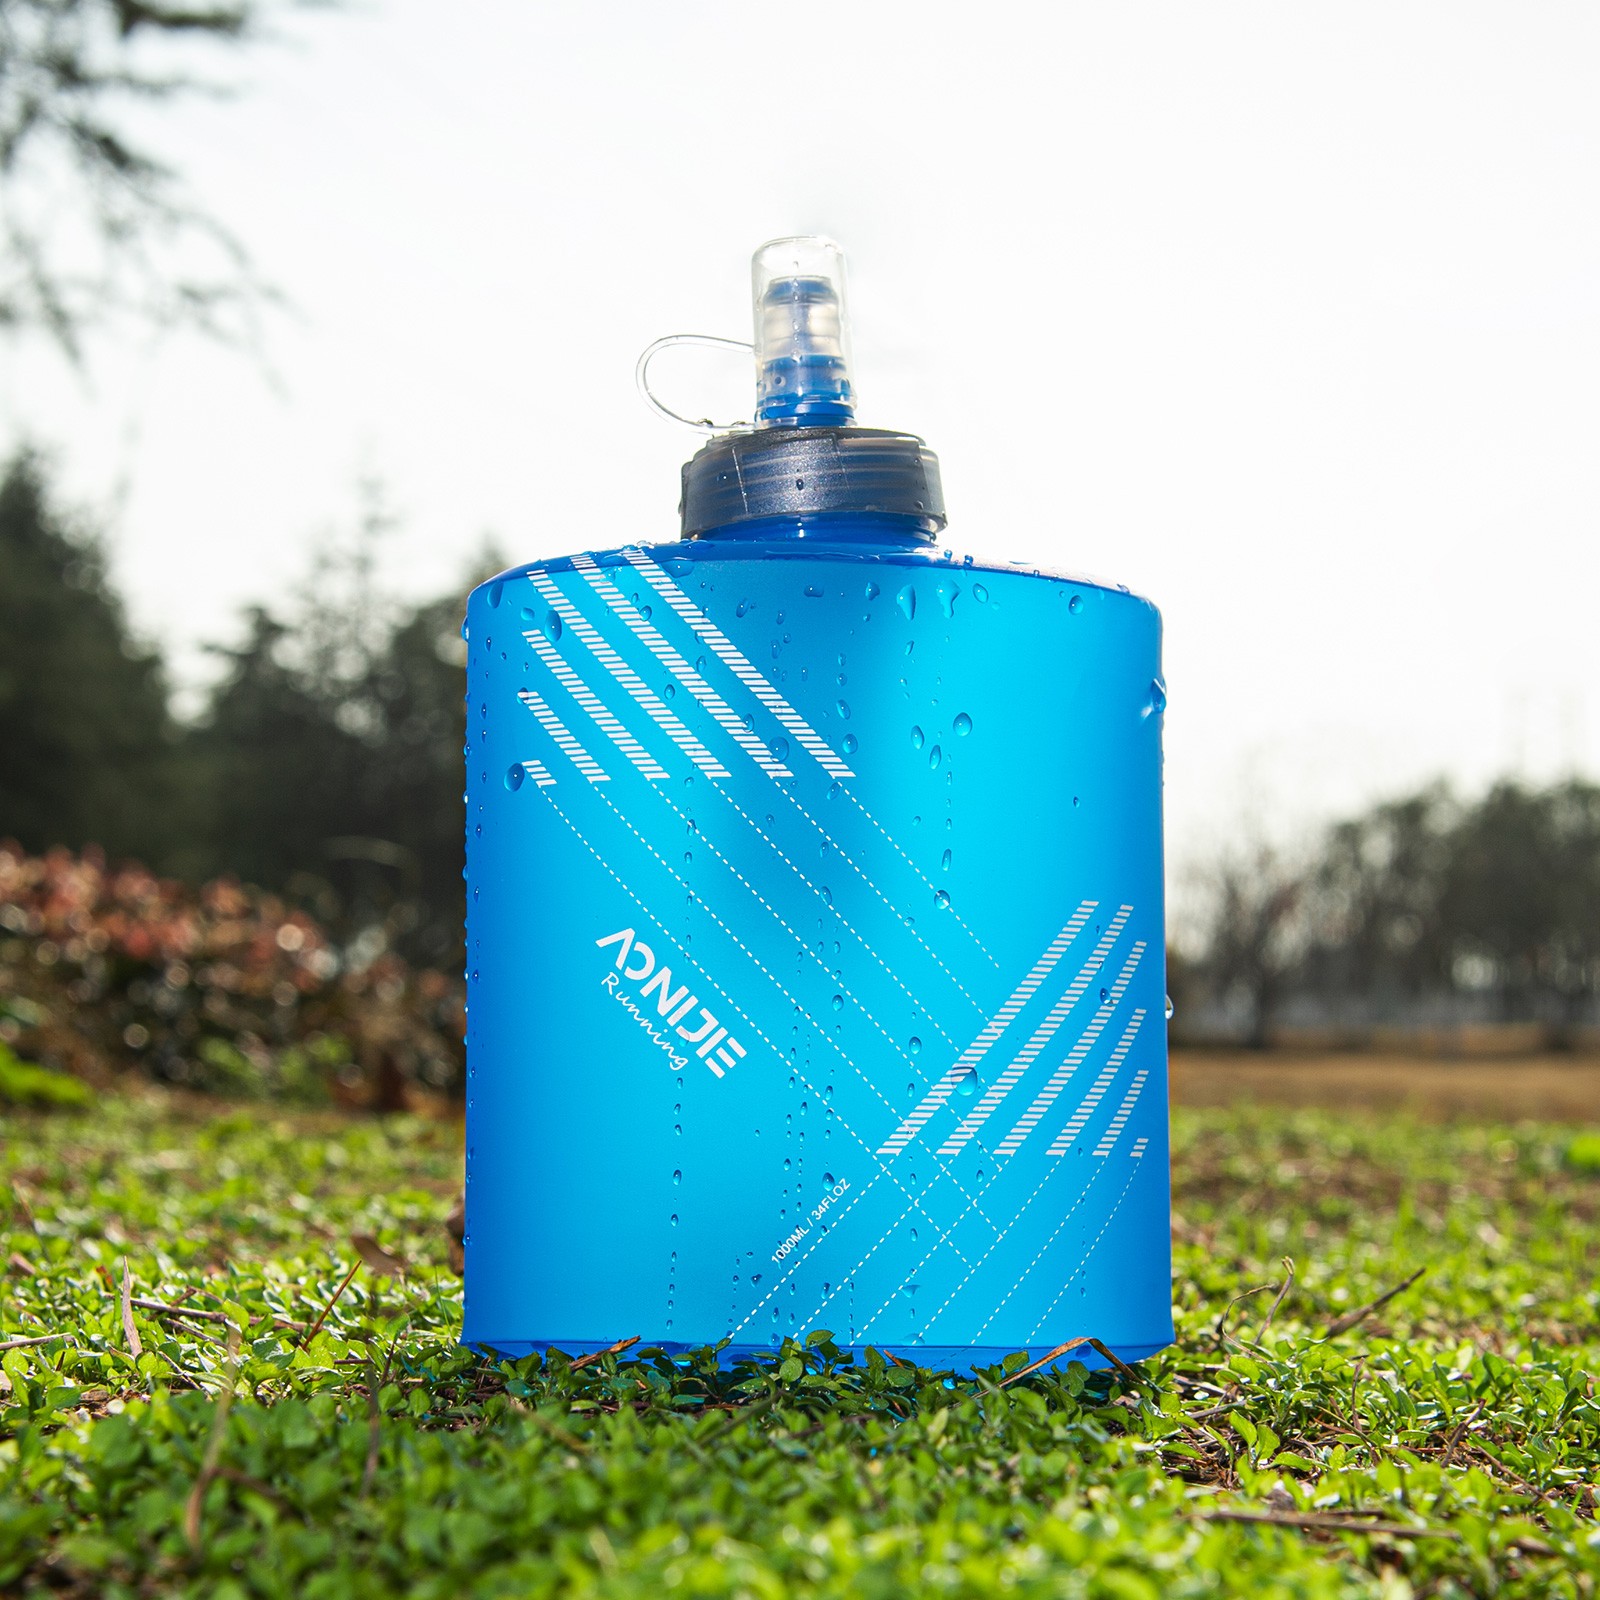 AONIJIE SD29 New Design Outdoor Running Filter Kettle Bottle 1L 2L Soft Flask Hydration Kettle BPA Free for Traveling Hiking Cycling